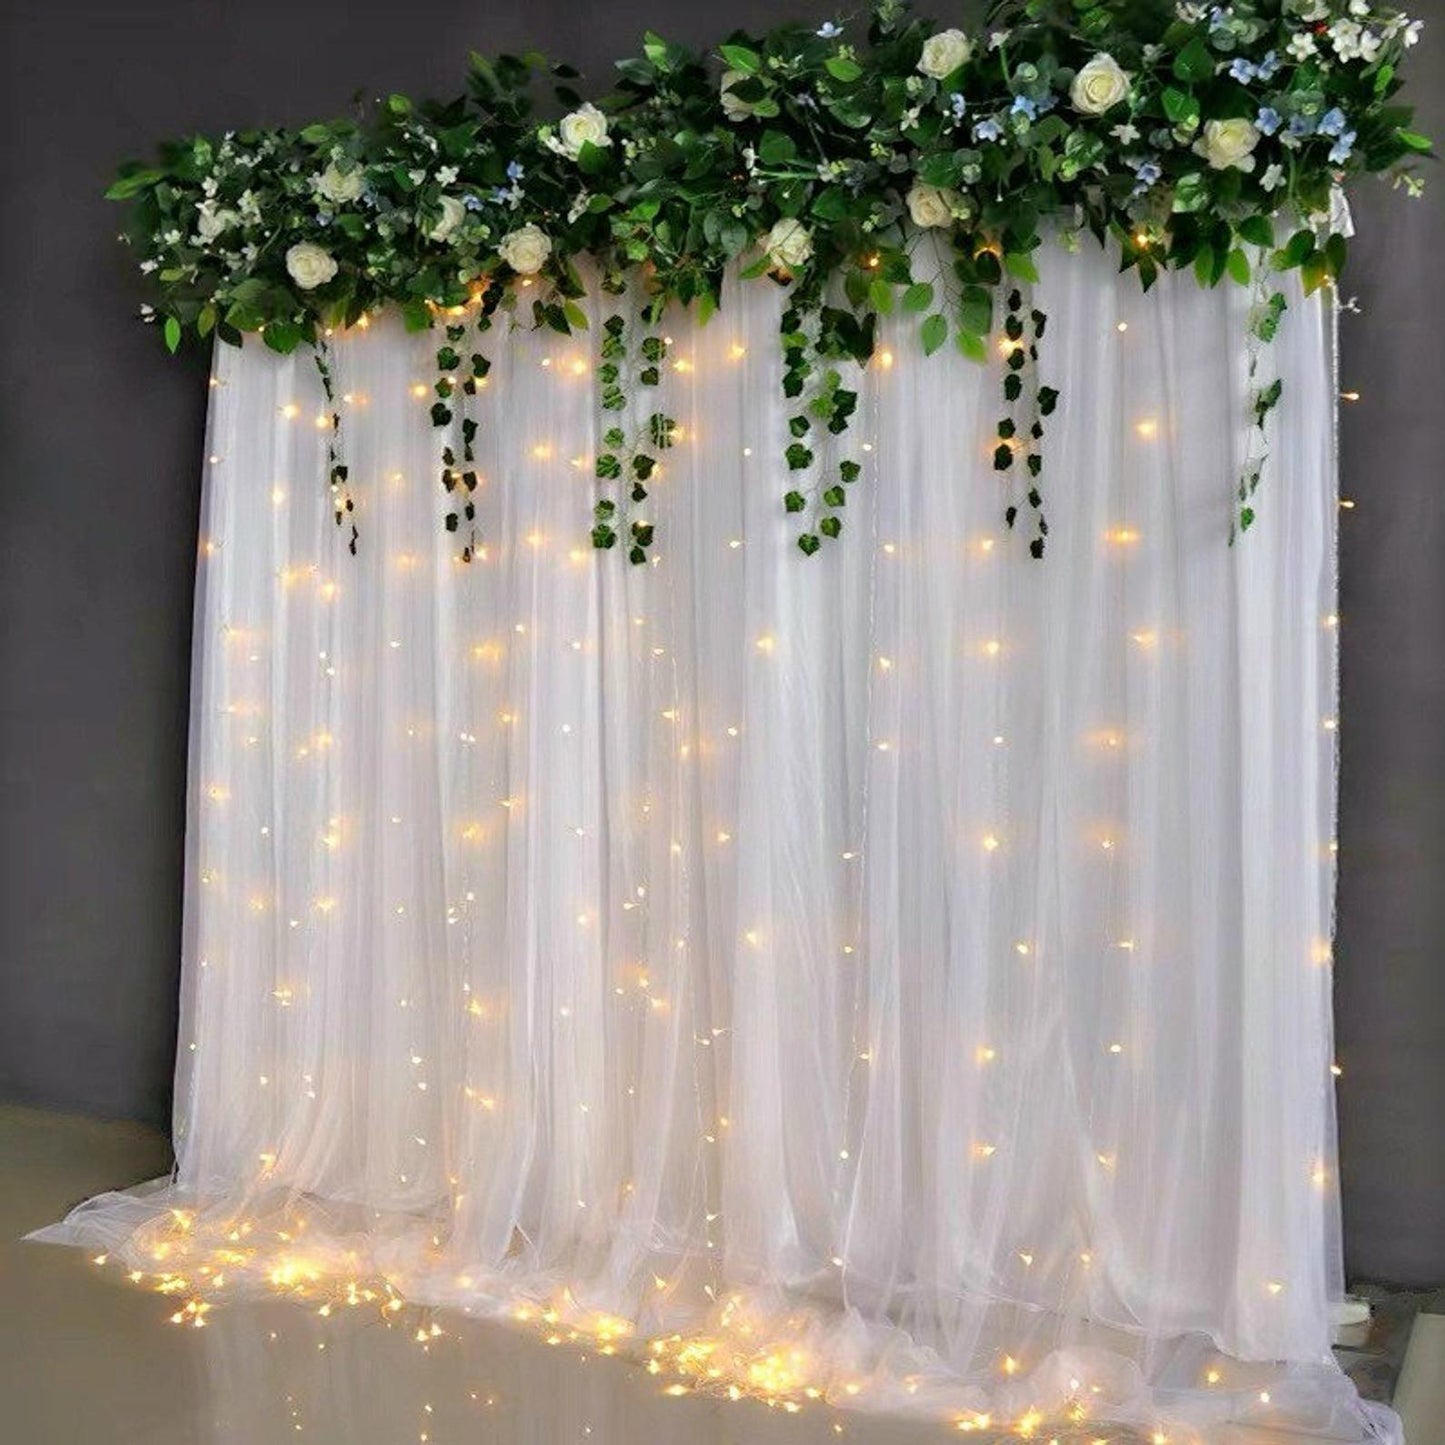 8 Lighting Modes for Bedroom Wedding Party Home Indoor Curtain